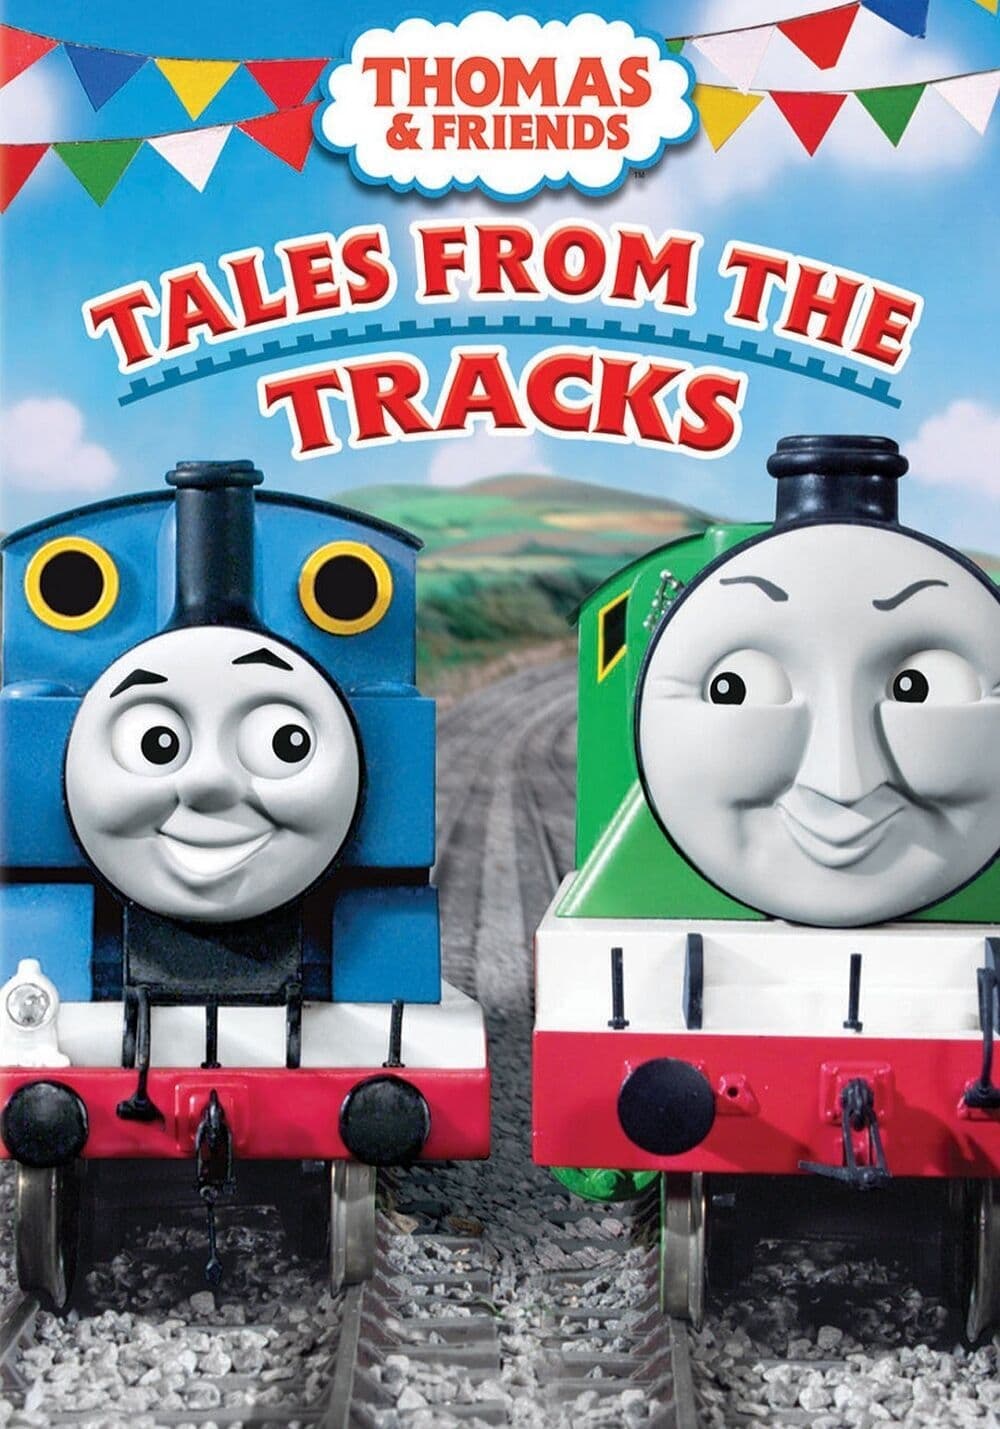 Thomas & Friends: Tales from the Tracks